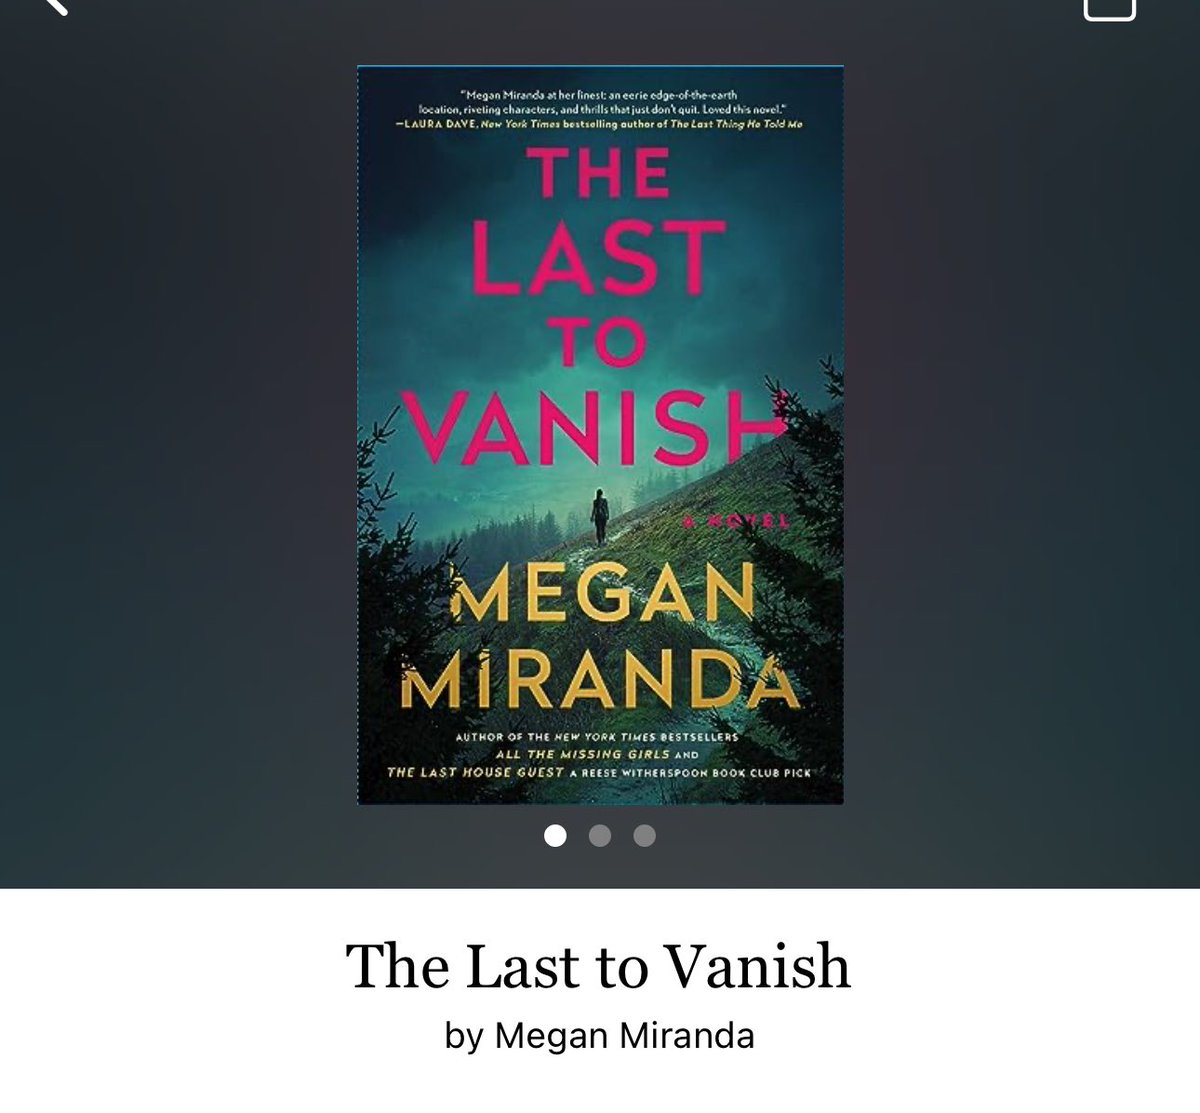 Last to Vanish by Megan Miranda 

#LastToVanish by #MeganMiranda #6210 #24chapters #323pages #359of400 #9houraudiobook #Audiobook #121for31 #march2024 #clearingoffreadingshelves #whatsnext #readitquick